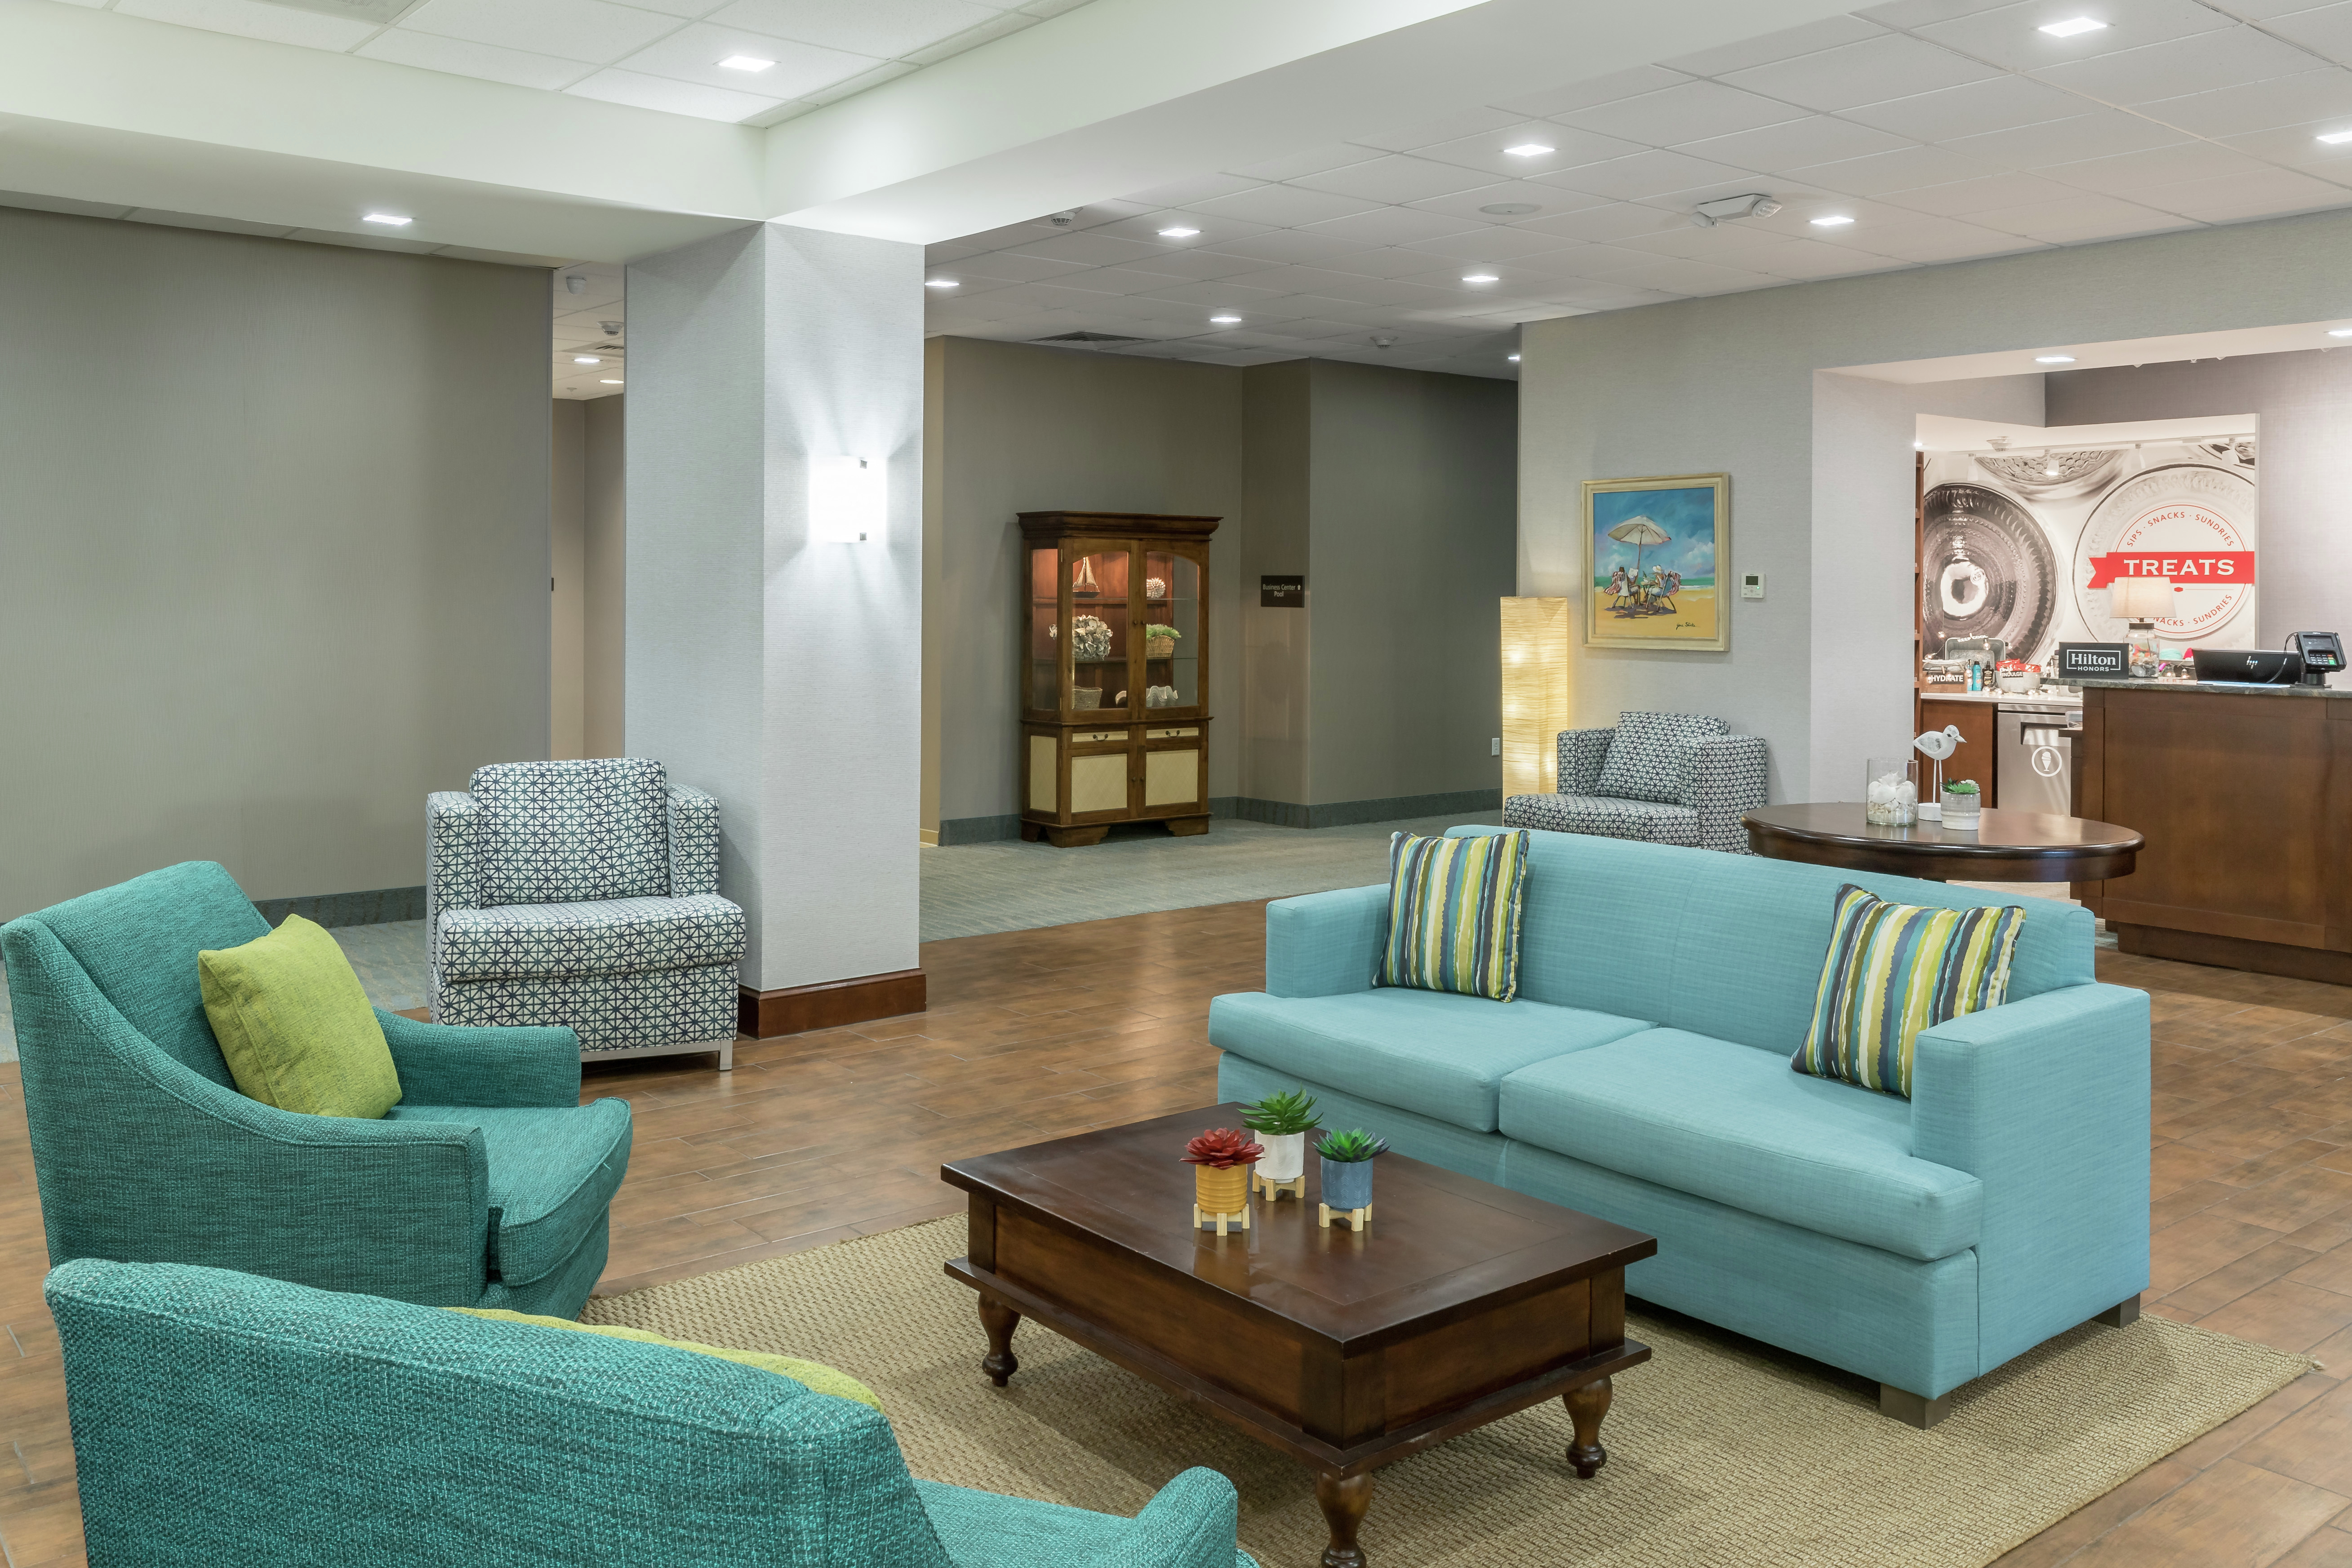 Lobby Seating Area with Sofa, Armchairs and Coffee Table